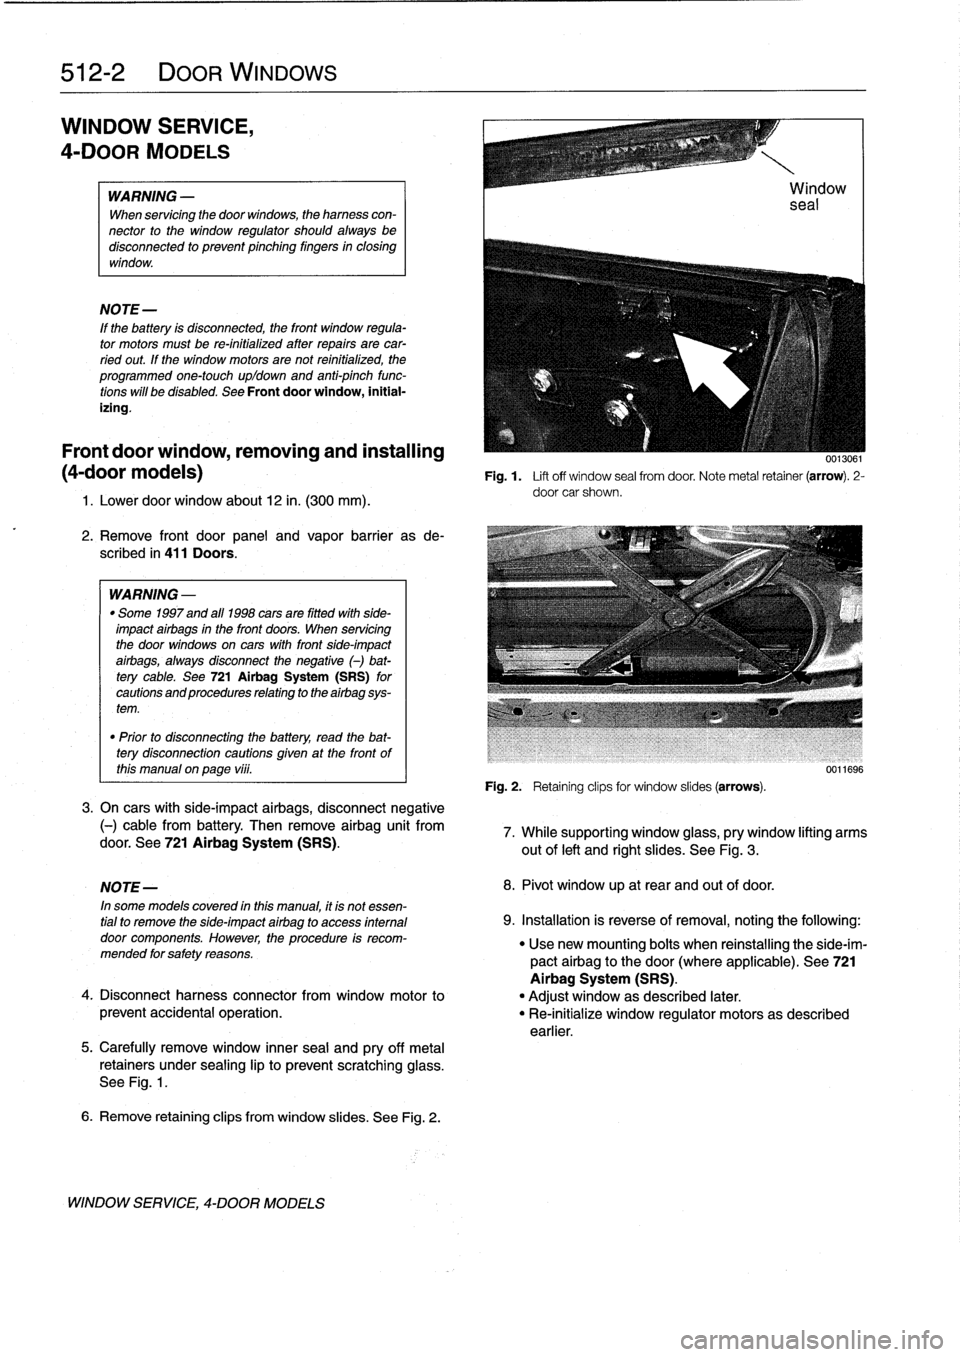 BMW 318i 1997 E36 User Guide 
512-2

	

DOOR
WINDOWS

WINDOW
SERVICE,

4-DOOR
MODELS

WARNING
-

When
servicing
the
door
wíndows,
theharness
con-
nector
to
the
window
regulator
shouldalways
be
disconnected
to
prevent
pinching
fi